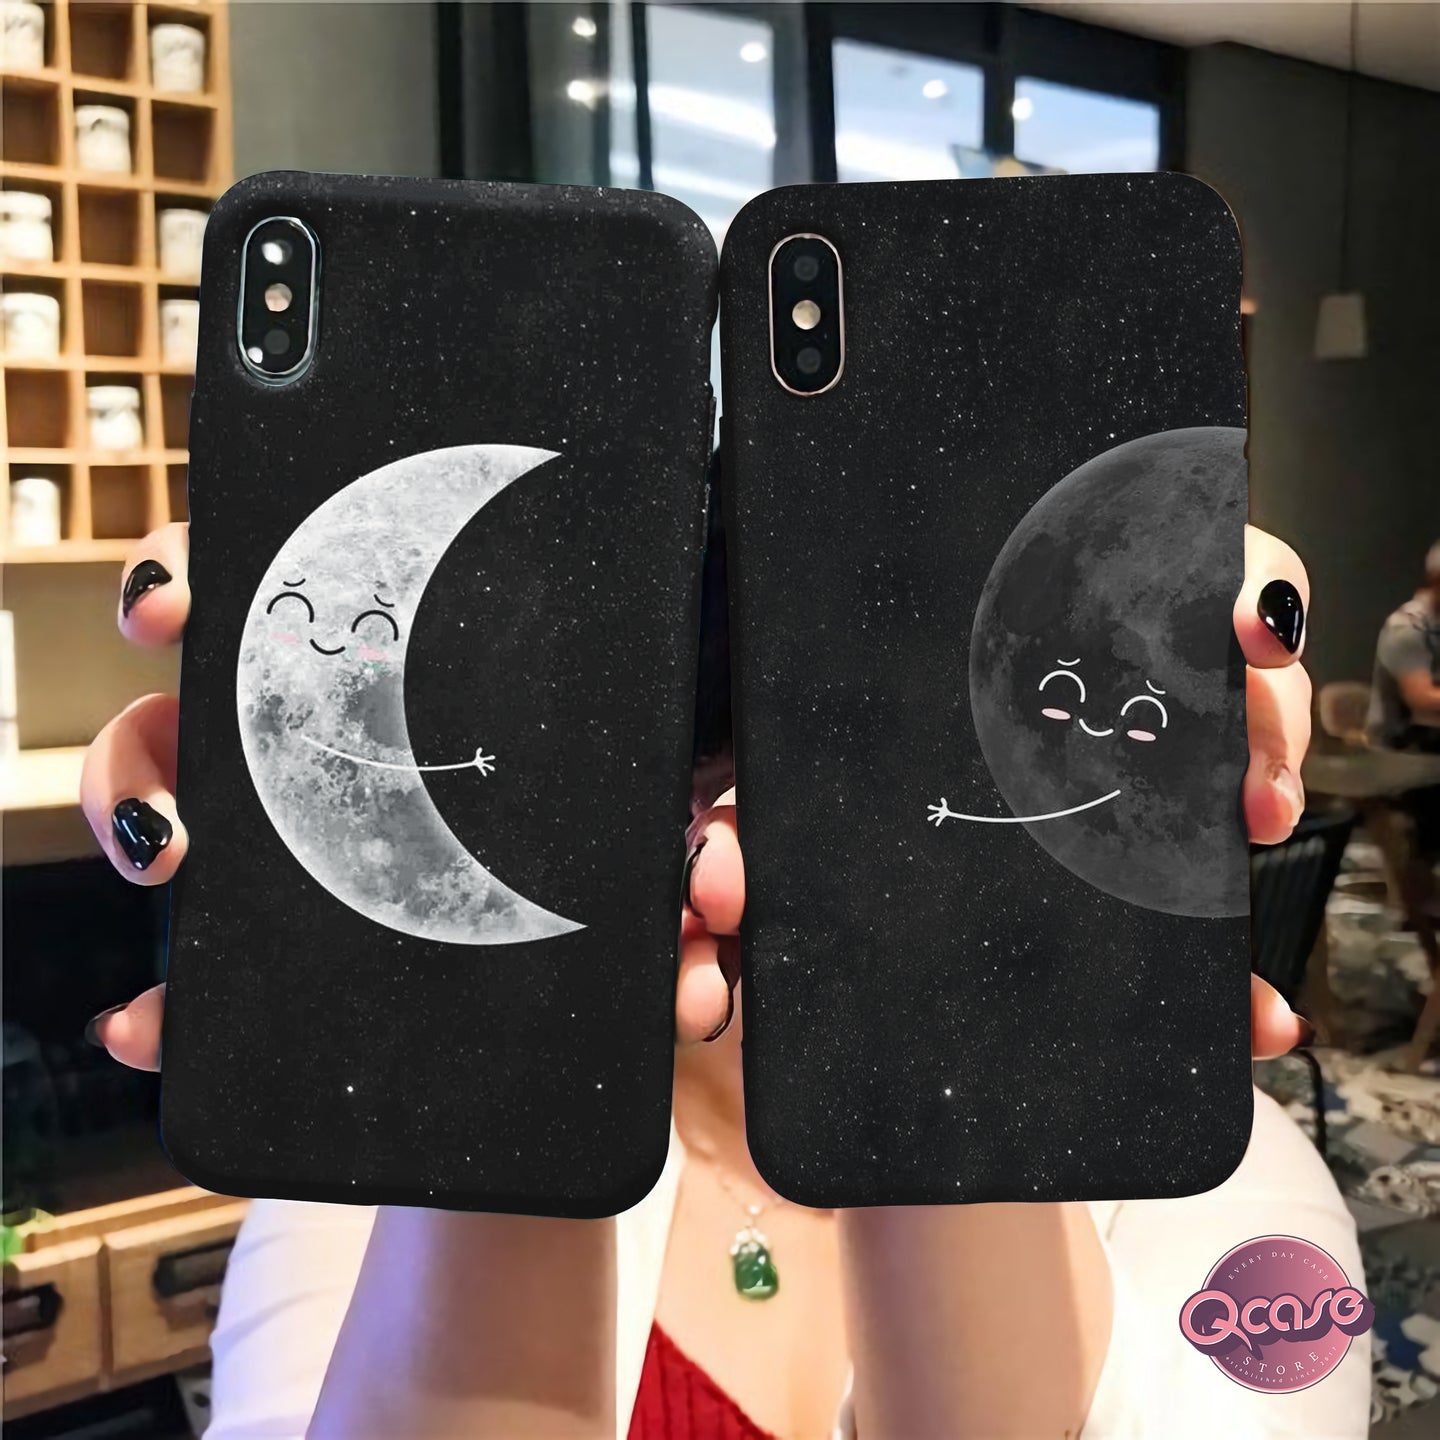 holding moon matching cases